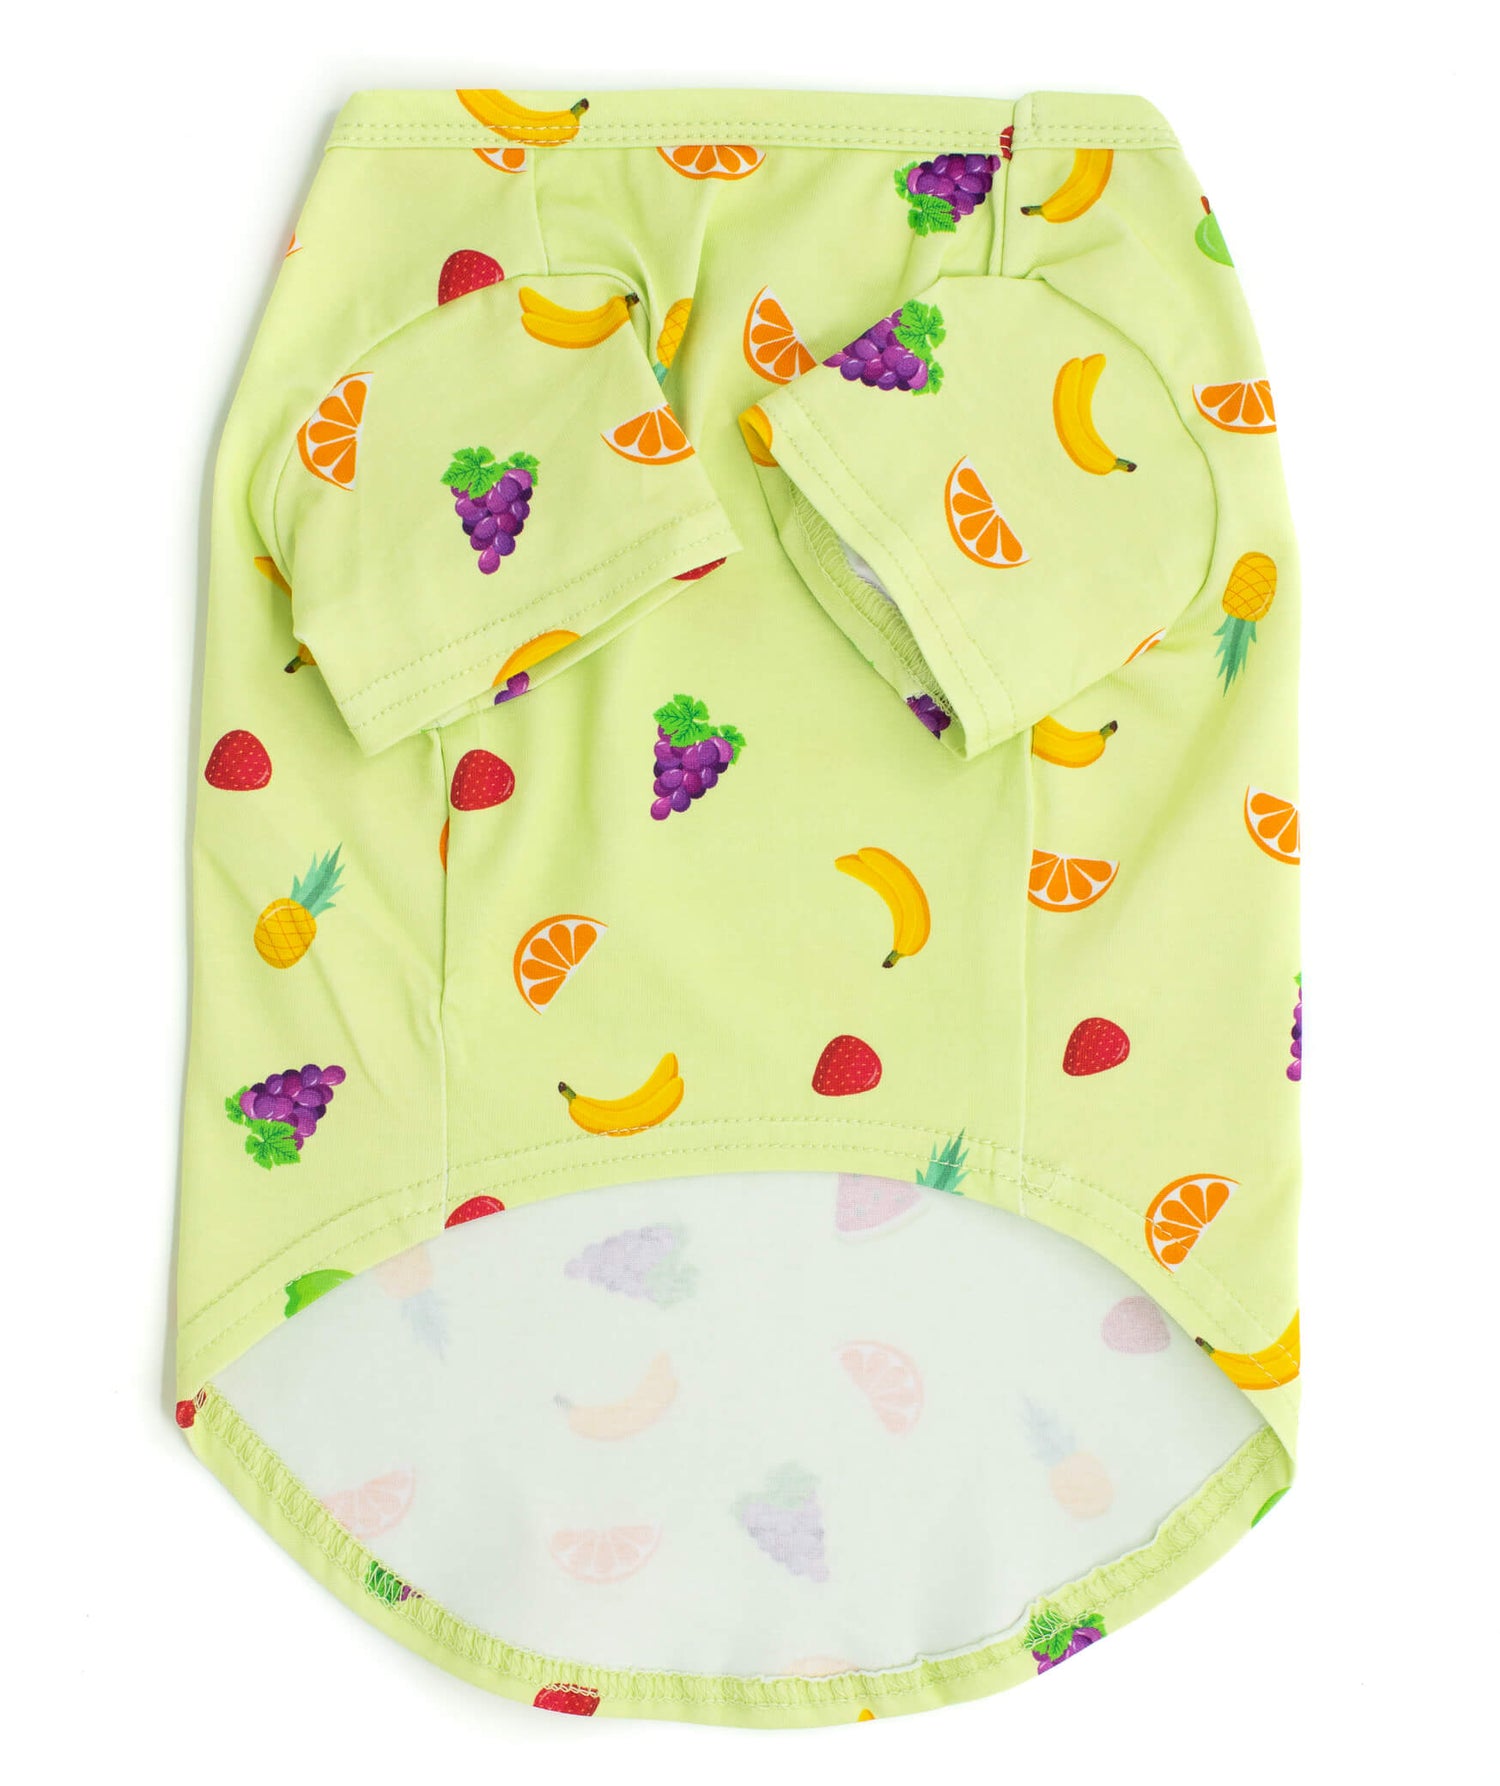 Front of Feelin' Fruity dog t-shirt. It is lime green with bananas, grapes, oranges, and pineapple printed on it.